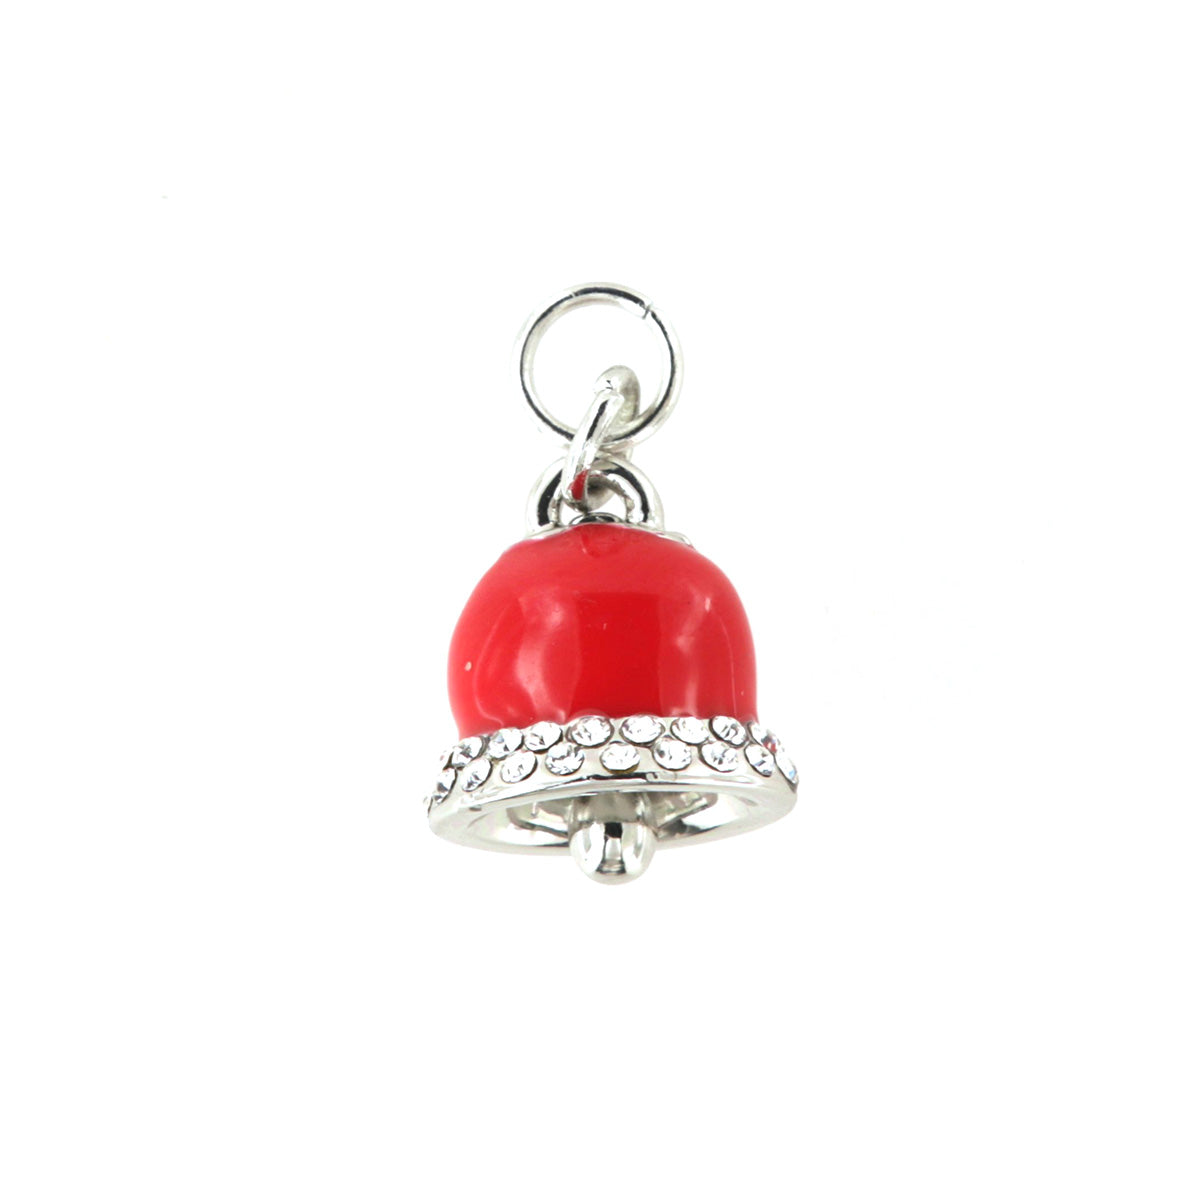 Metal pendant bell bell with red enamel holder, embellished with white crystals